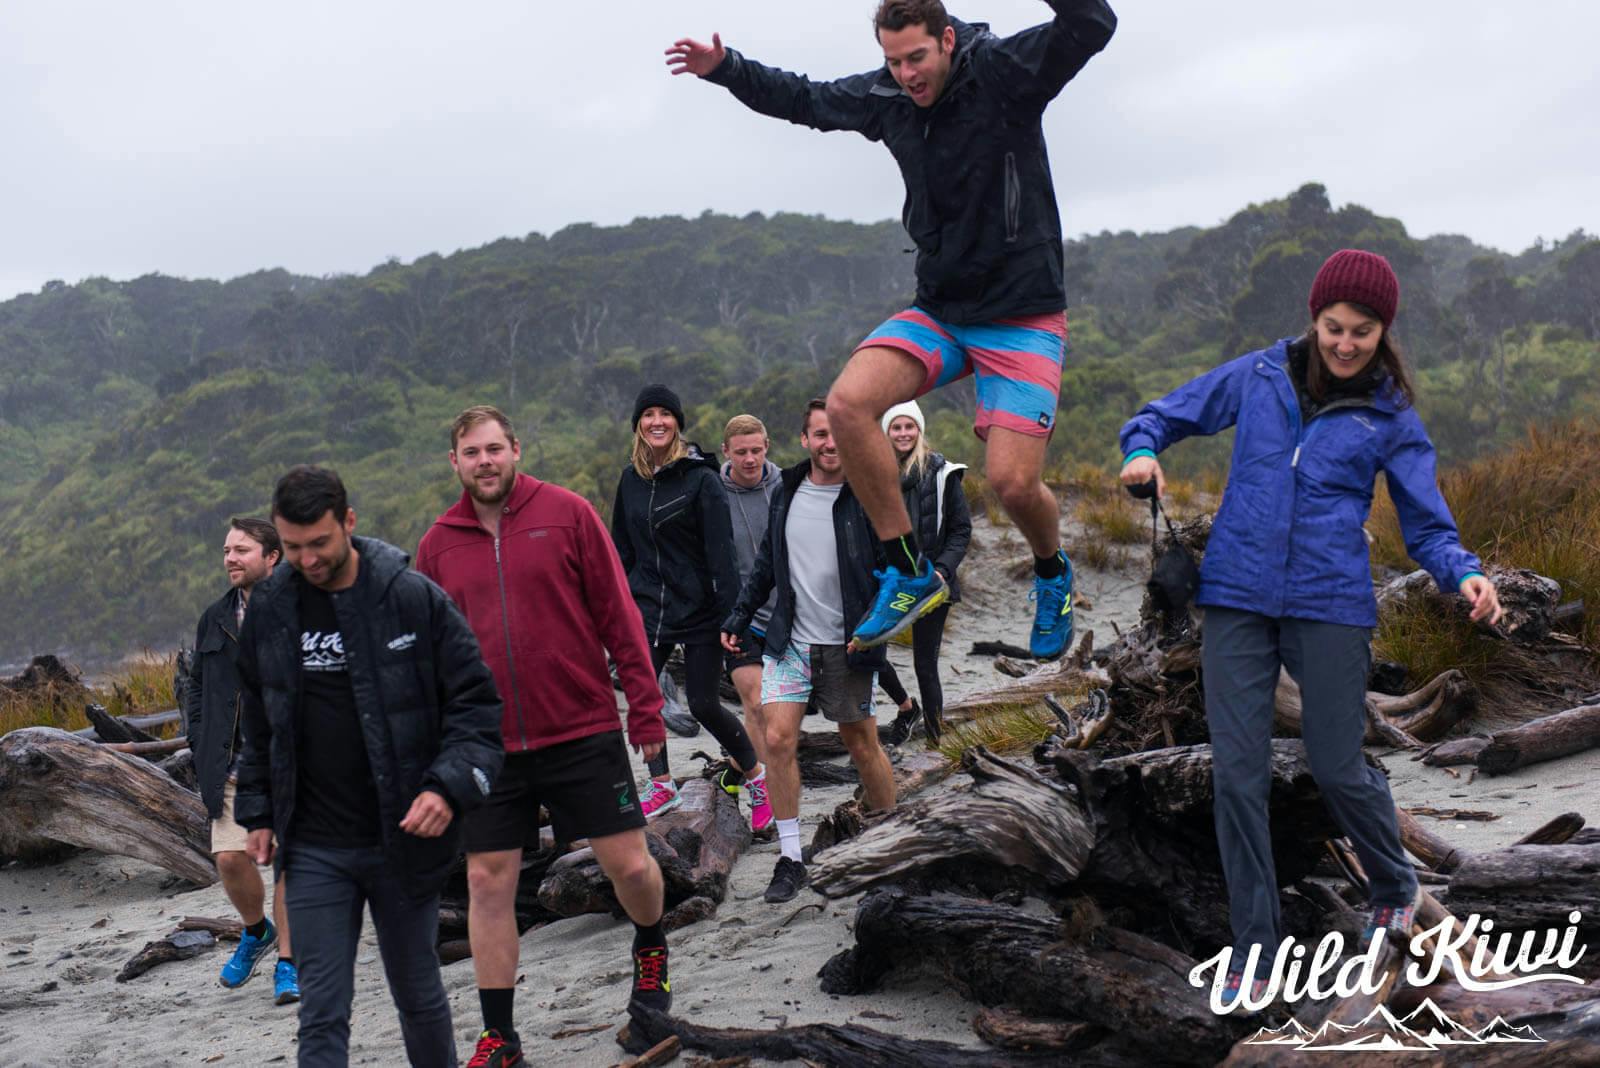 Travelling New Zealand in groups - Why get together with others for your trip?